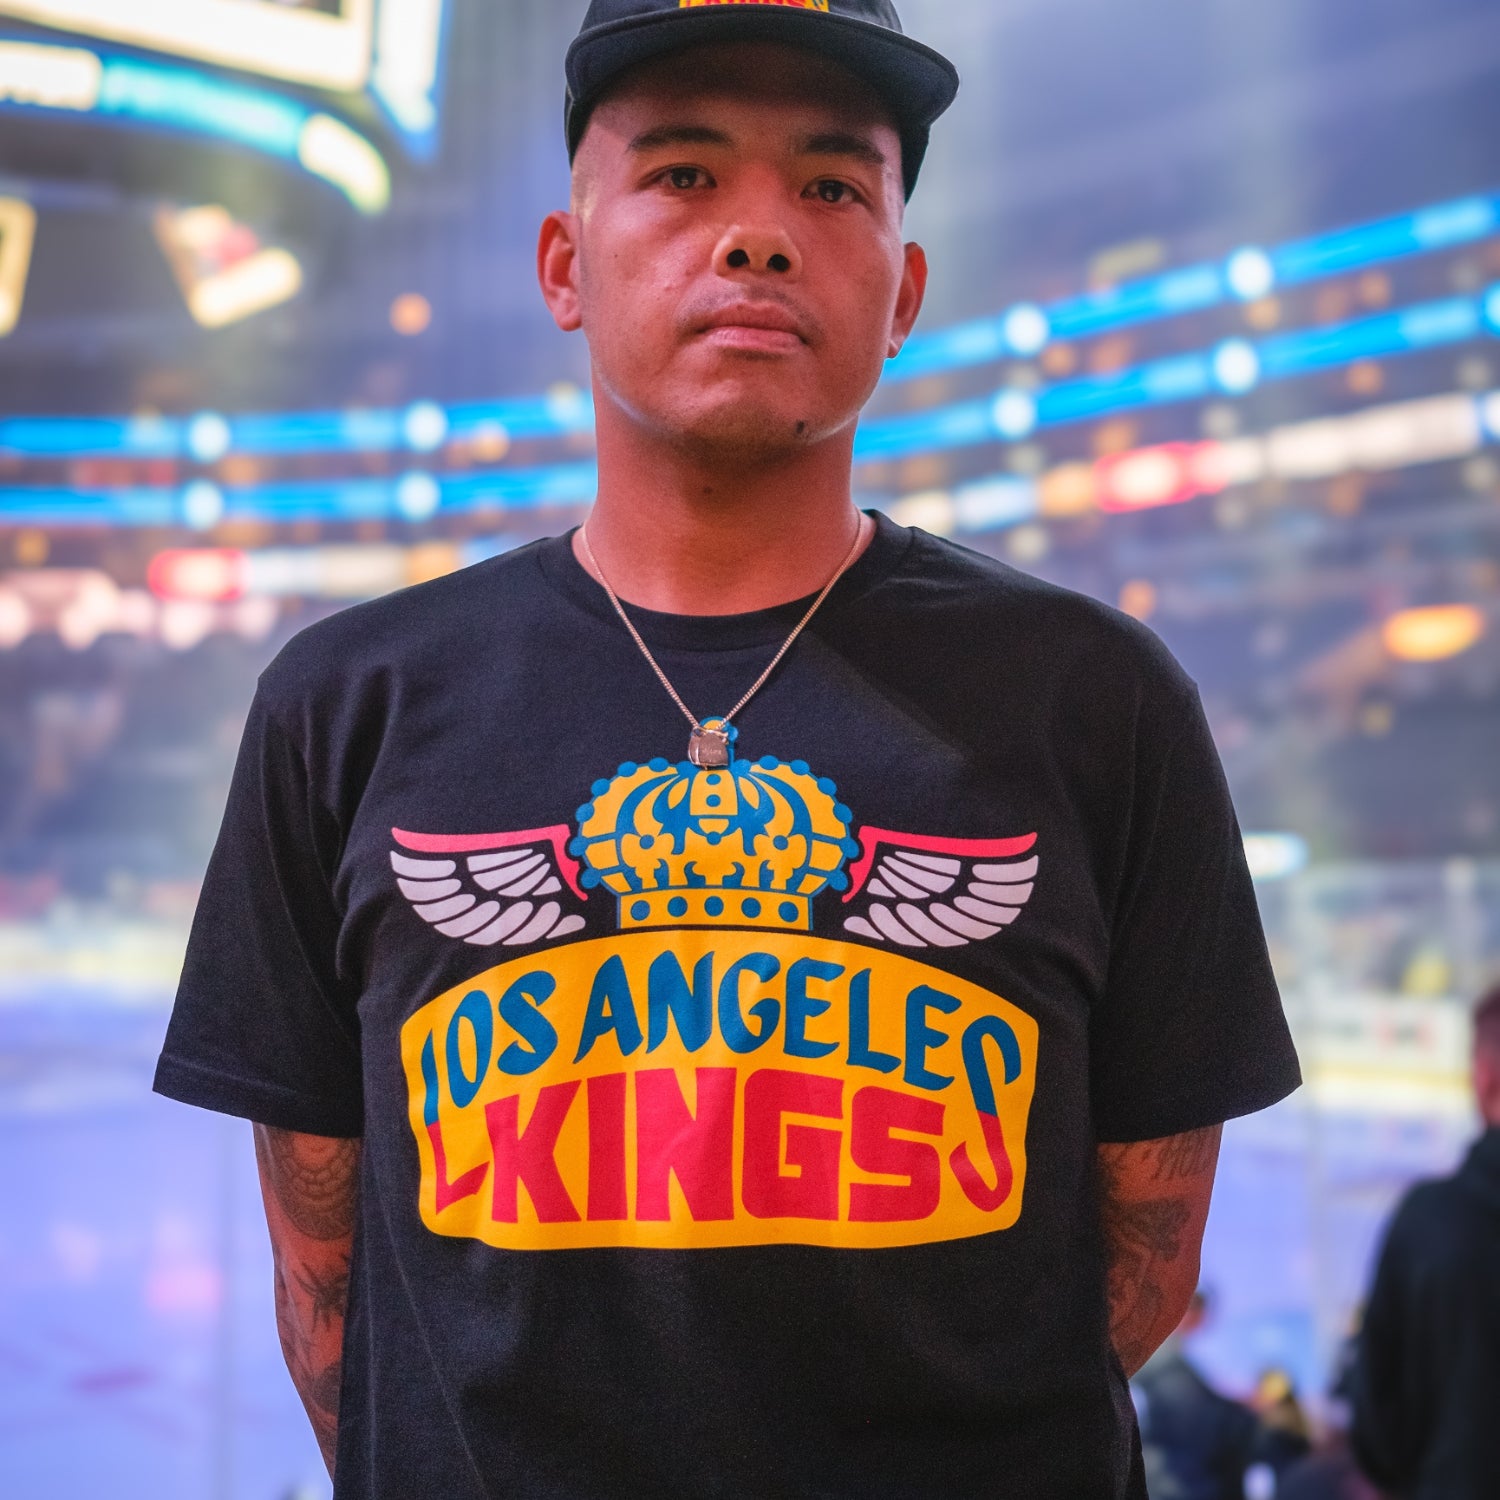 Immerse yourself in the vibrant convergence of hockey and culture as part of the LA Kings 2023-24 Filipino Heritage Night! Join the LA Kings in the celebration of Filipino Heritage and embrace roots in an unforgettable evening that blends the excitement of a Kings game with the richness of tradition.   As part of the Kings special game over the weekend, we're proud to introduce the KINGS X VG X FILIPINO HERITAGE Collection designed by local artist DJ Javier. This collection represents the fighting spirit of the Filipino people mixed with the LA Kings energy and attitude. Take advantage of the opportunity to pre-order these event exclusive and limited edition items, ensuring you have a piece of this unique celebration to cherish.